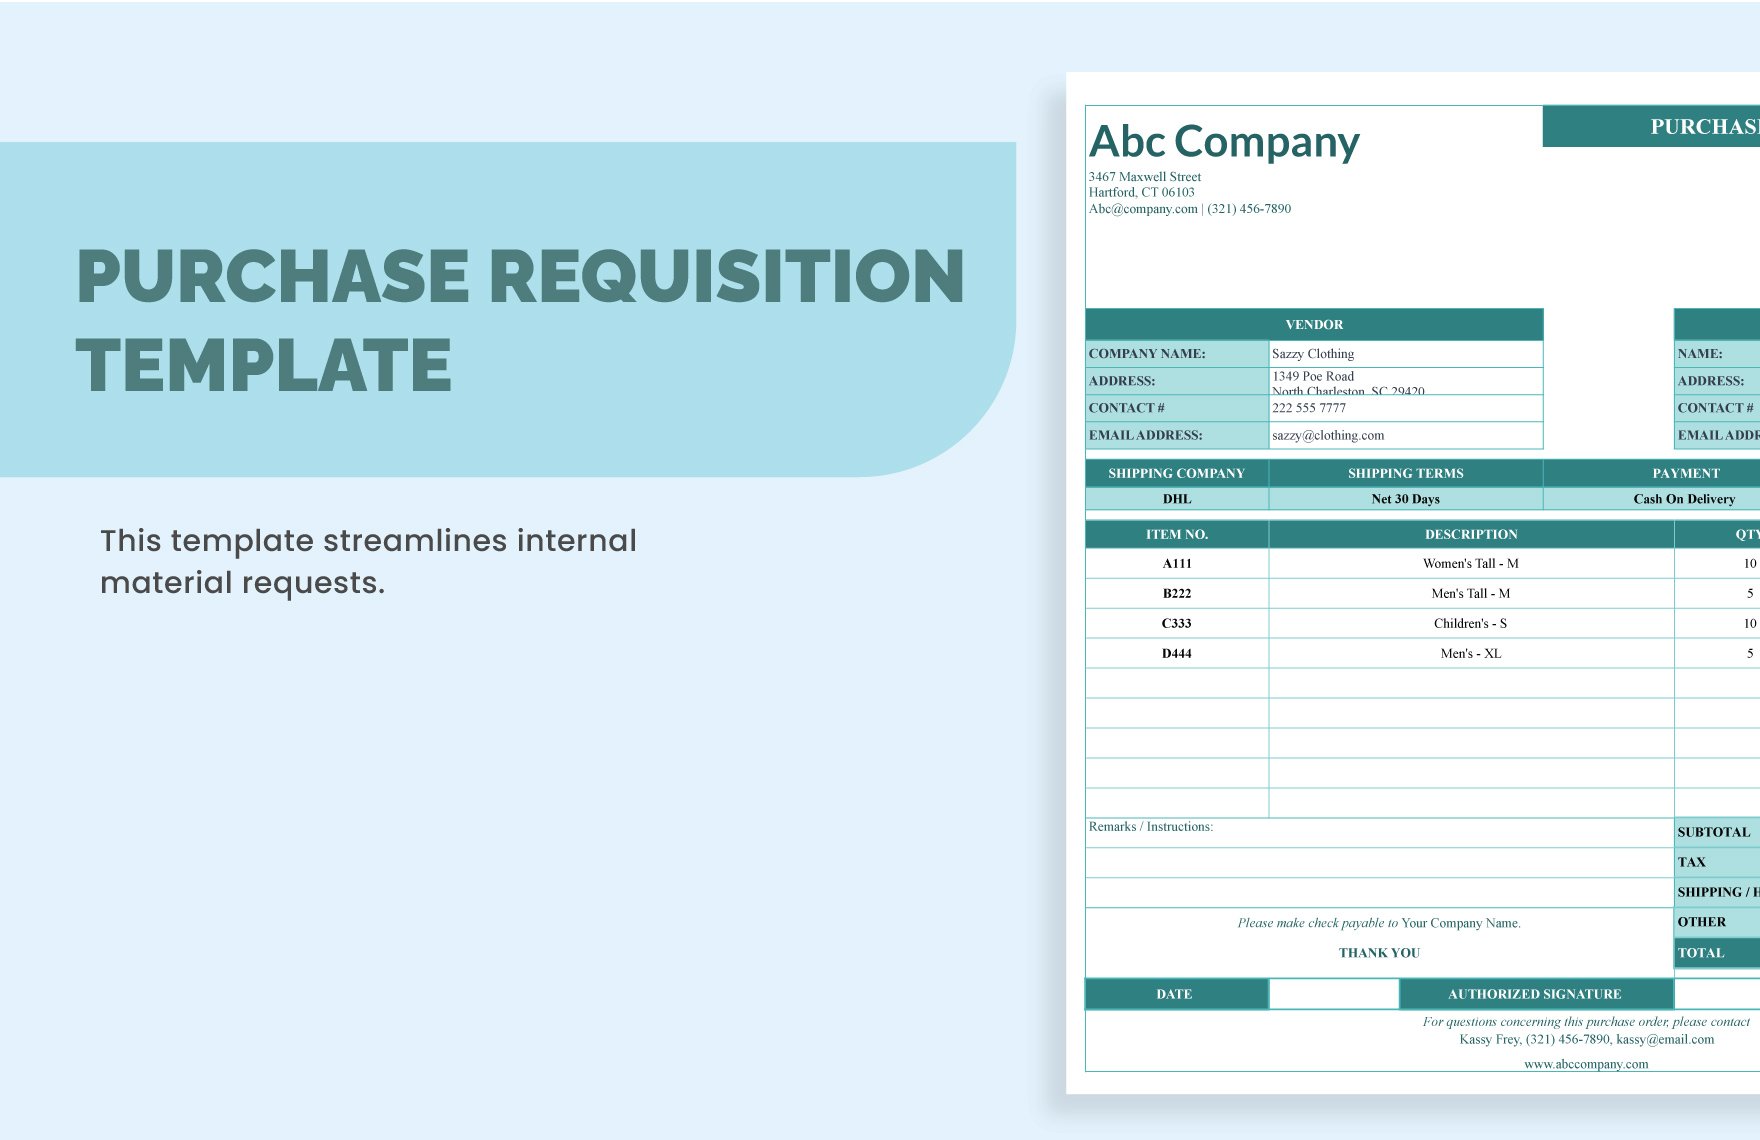 Purchase Requisition Template in Excel, Google Sheets